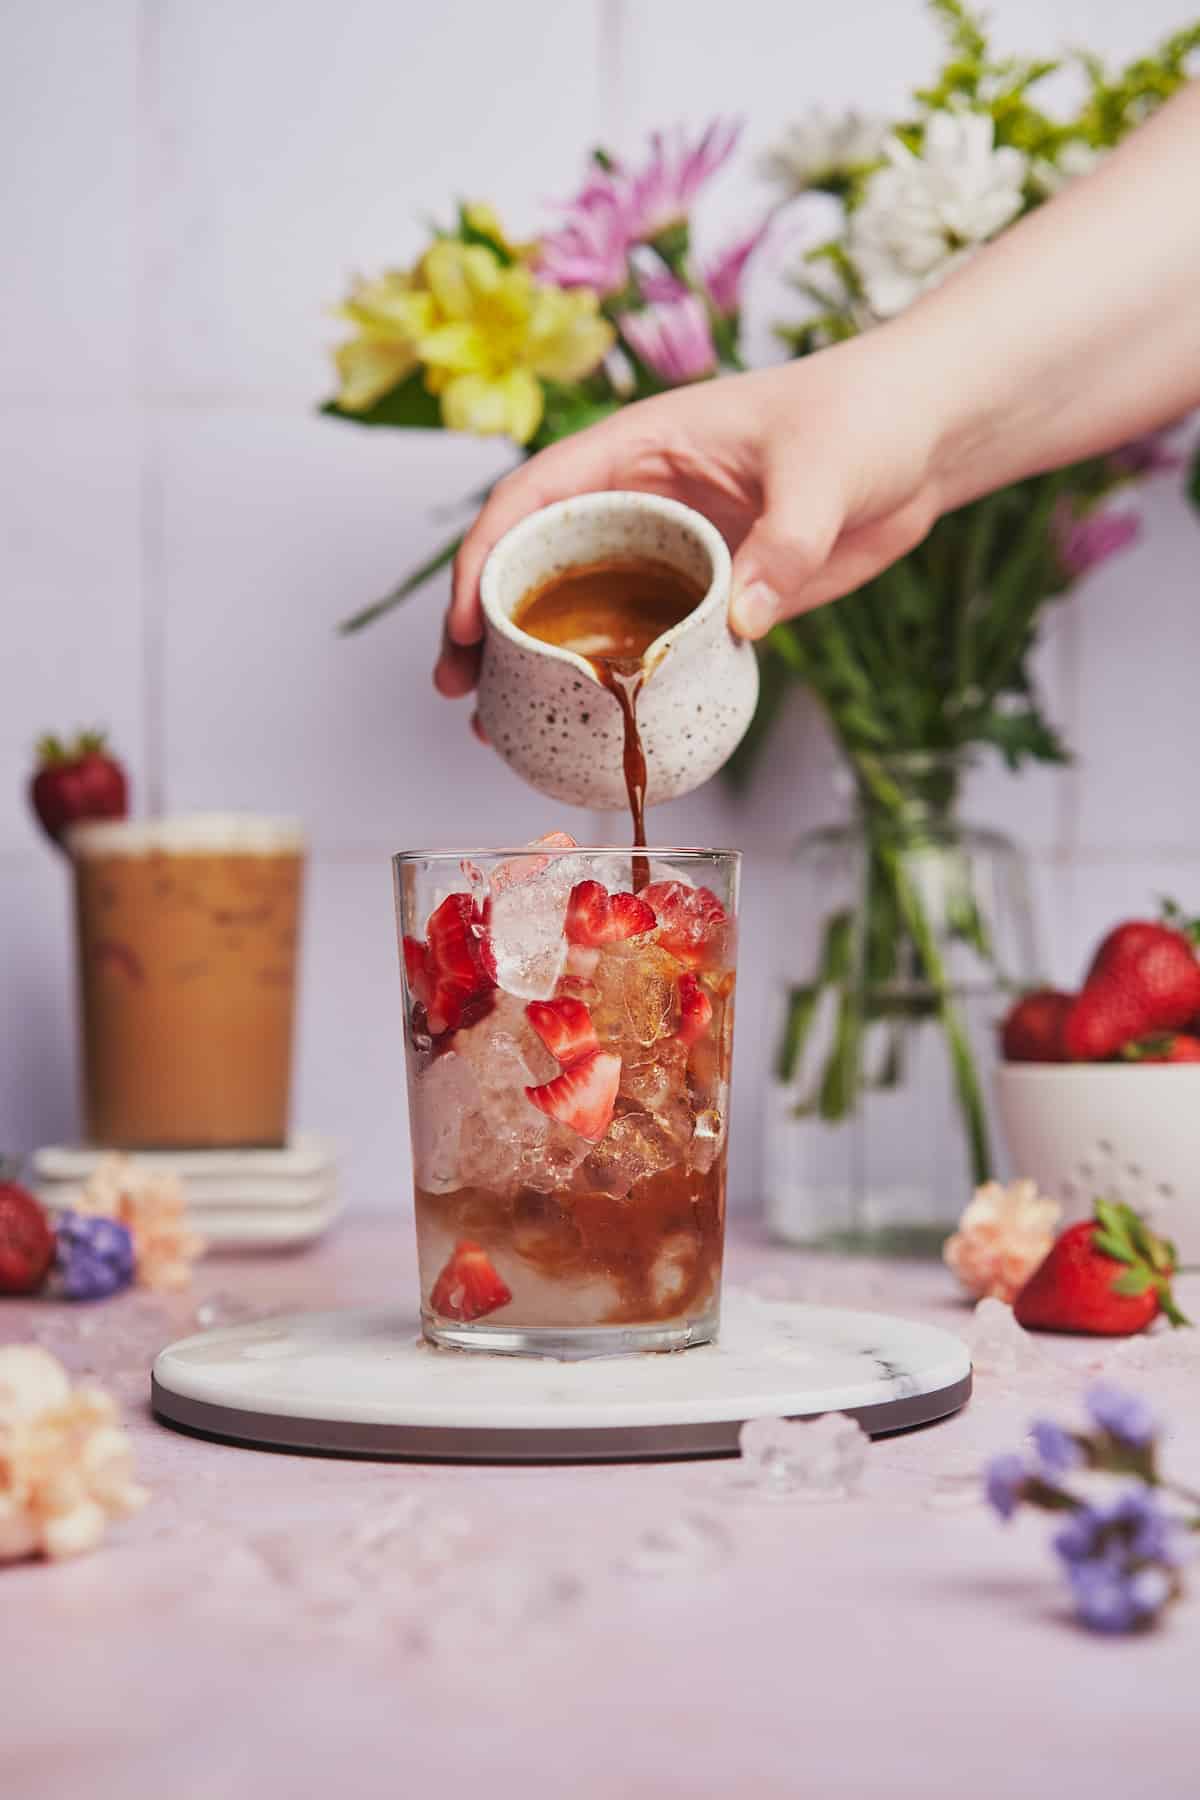 hand pouring espresso into a glass with ice and strawberries.